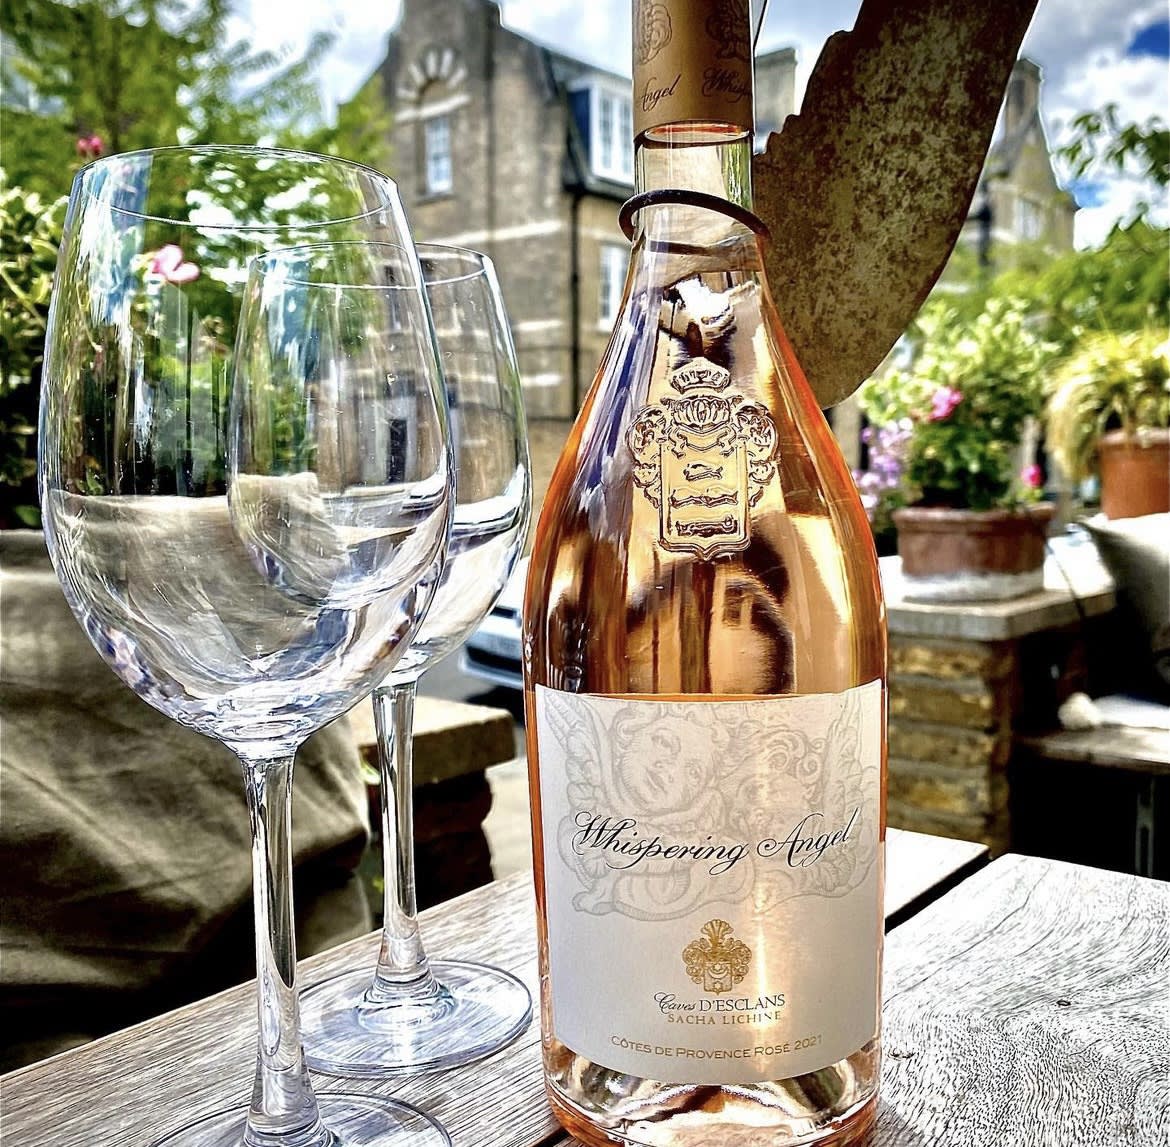 The sun is making its way to our terrace, wine is chilling! 
See you soon ☀️ 

#theladbrokearms #ladbrokearmspub #theladbrokearmsnottinghillgate #saturday #outdoorspace #whisperingangel #rosewine #localpub